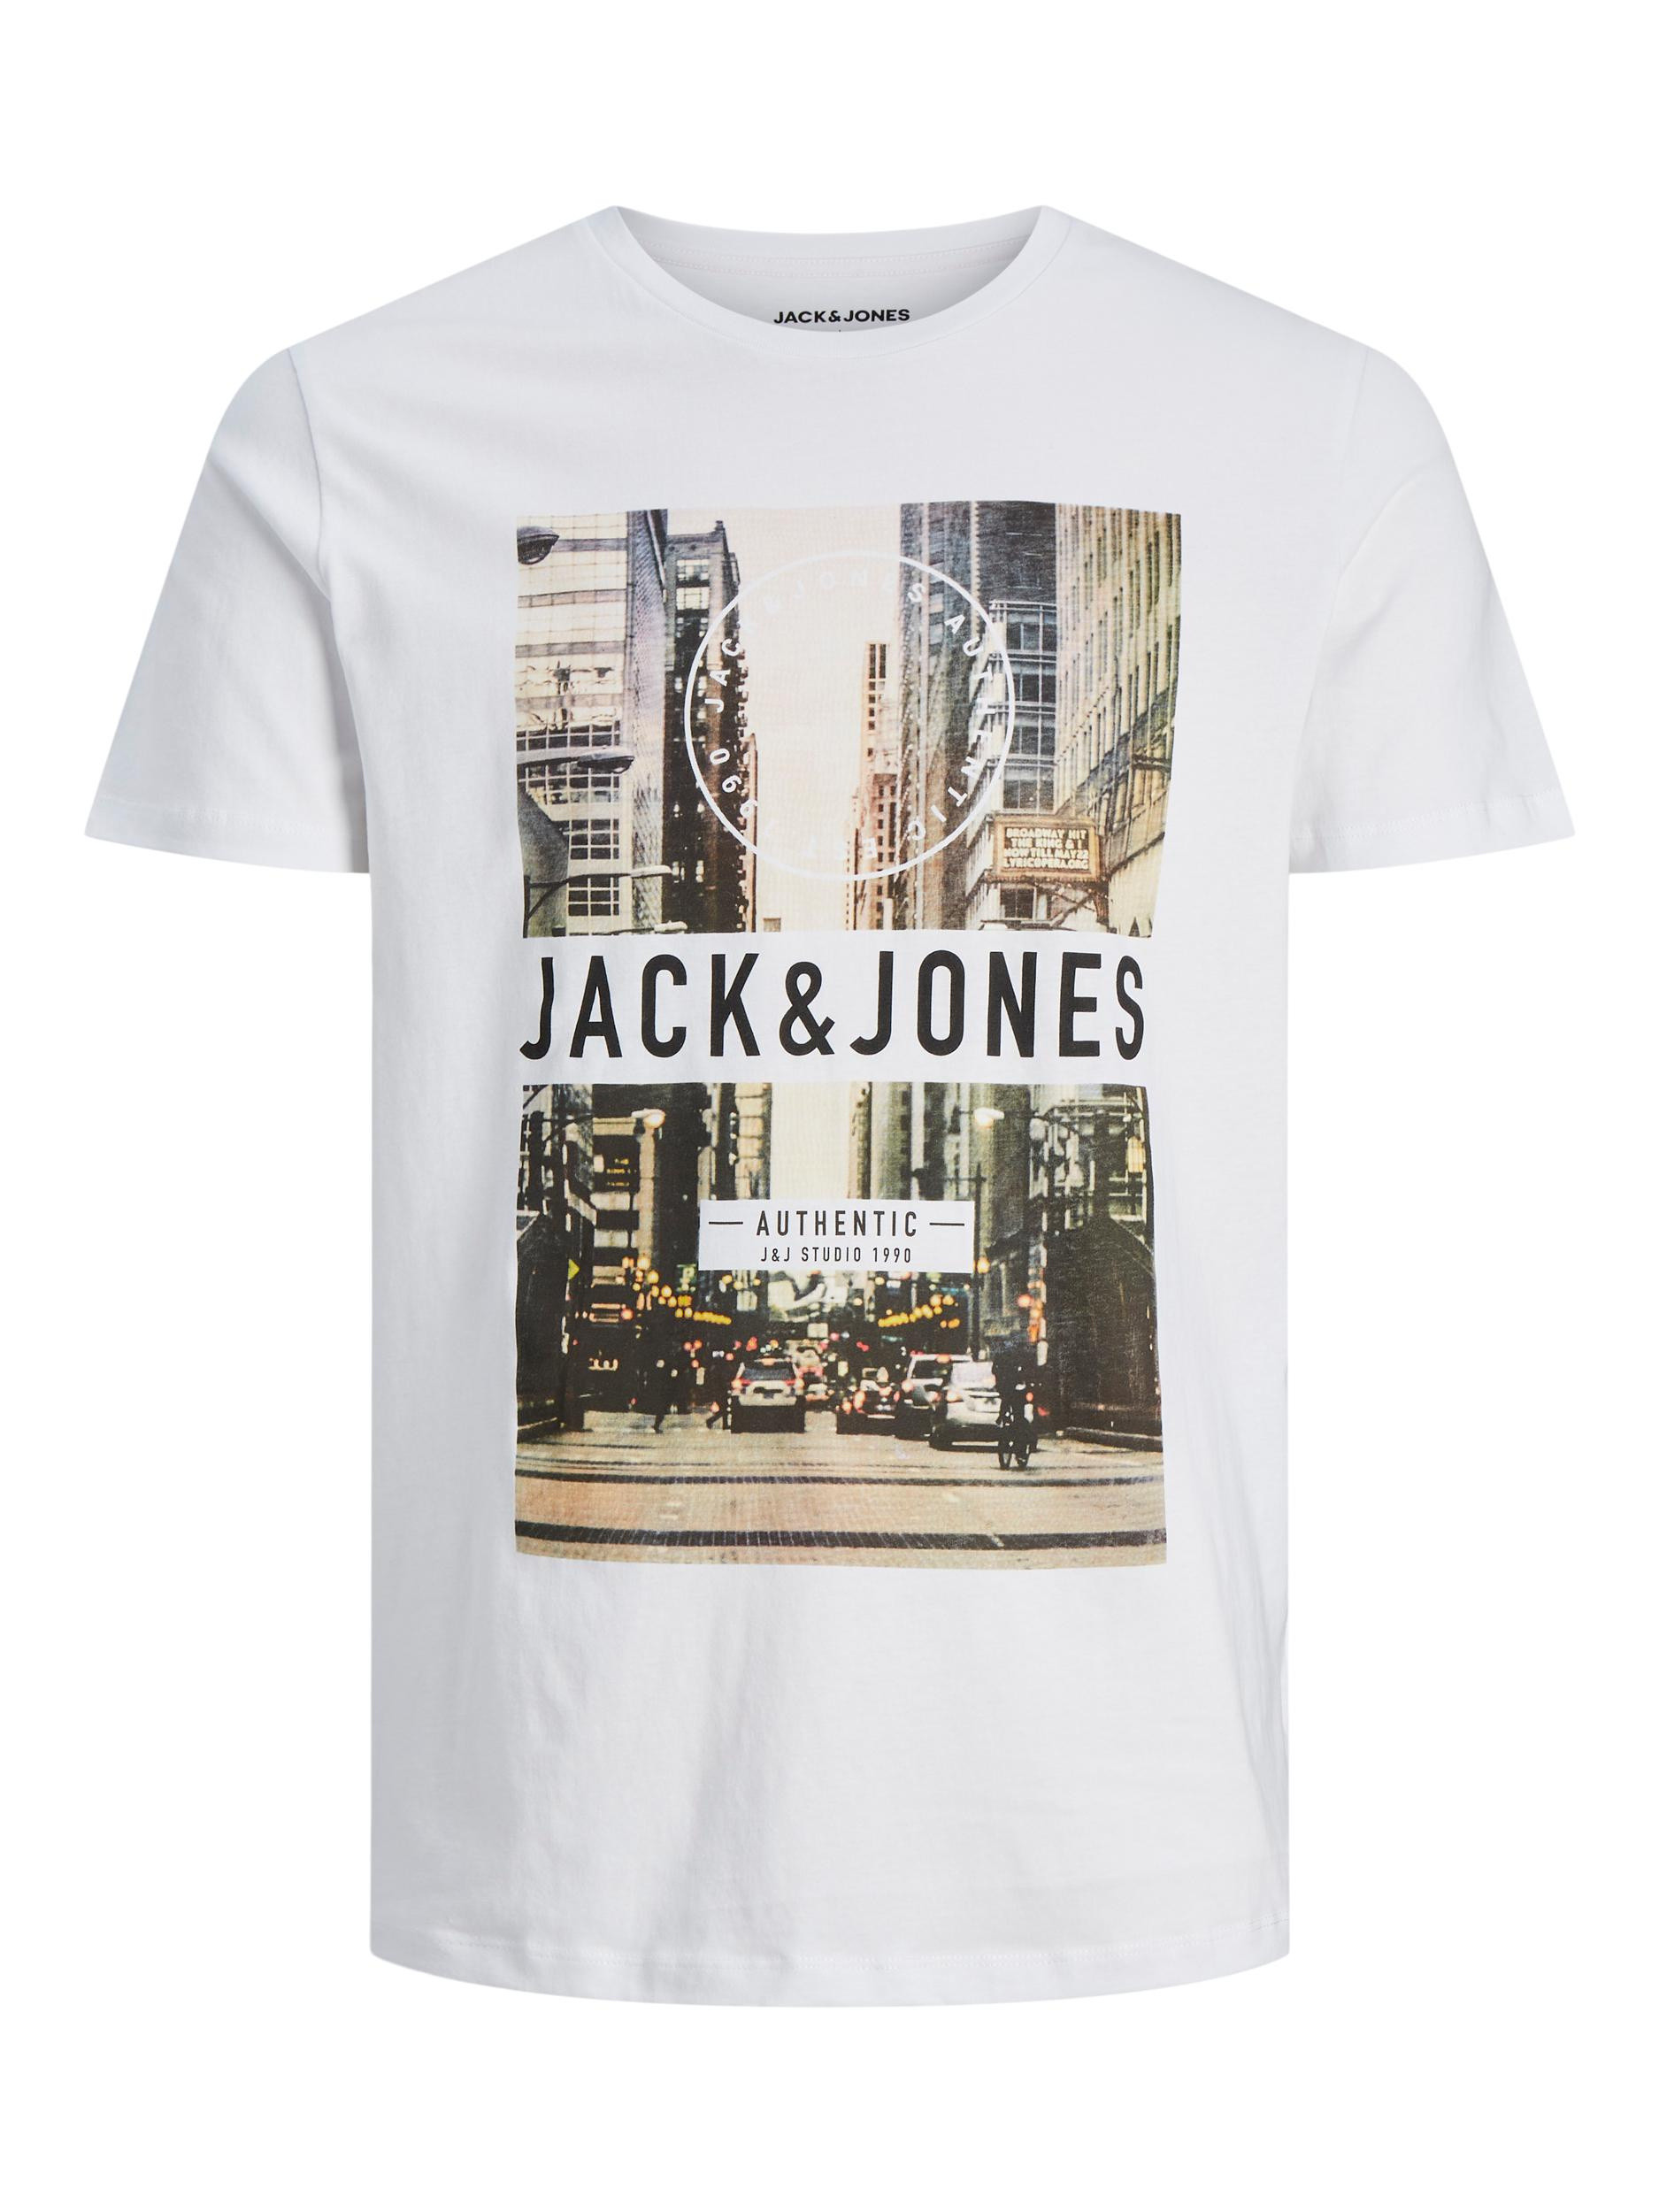 Jack & Jones -Cotton T-shirt with print, White, large image number 0